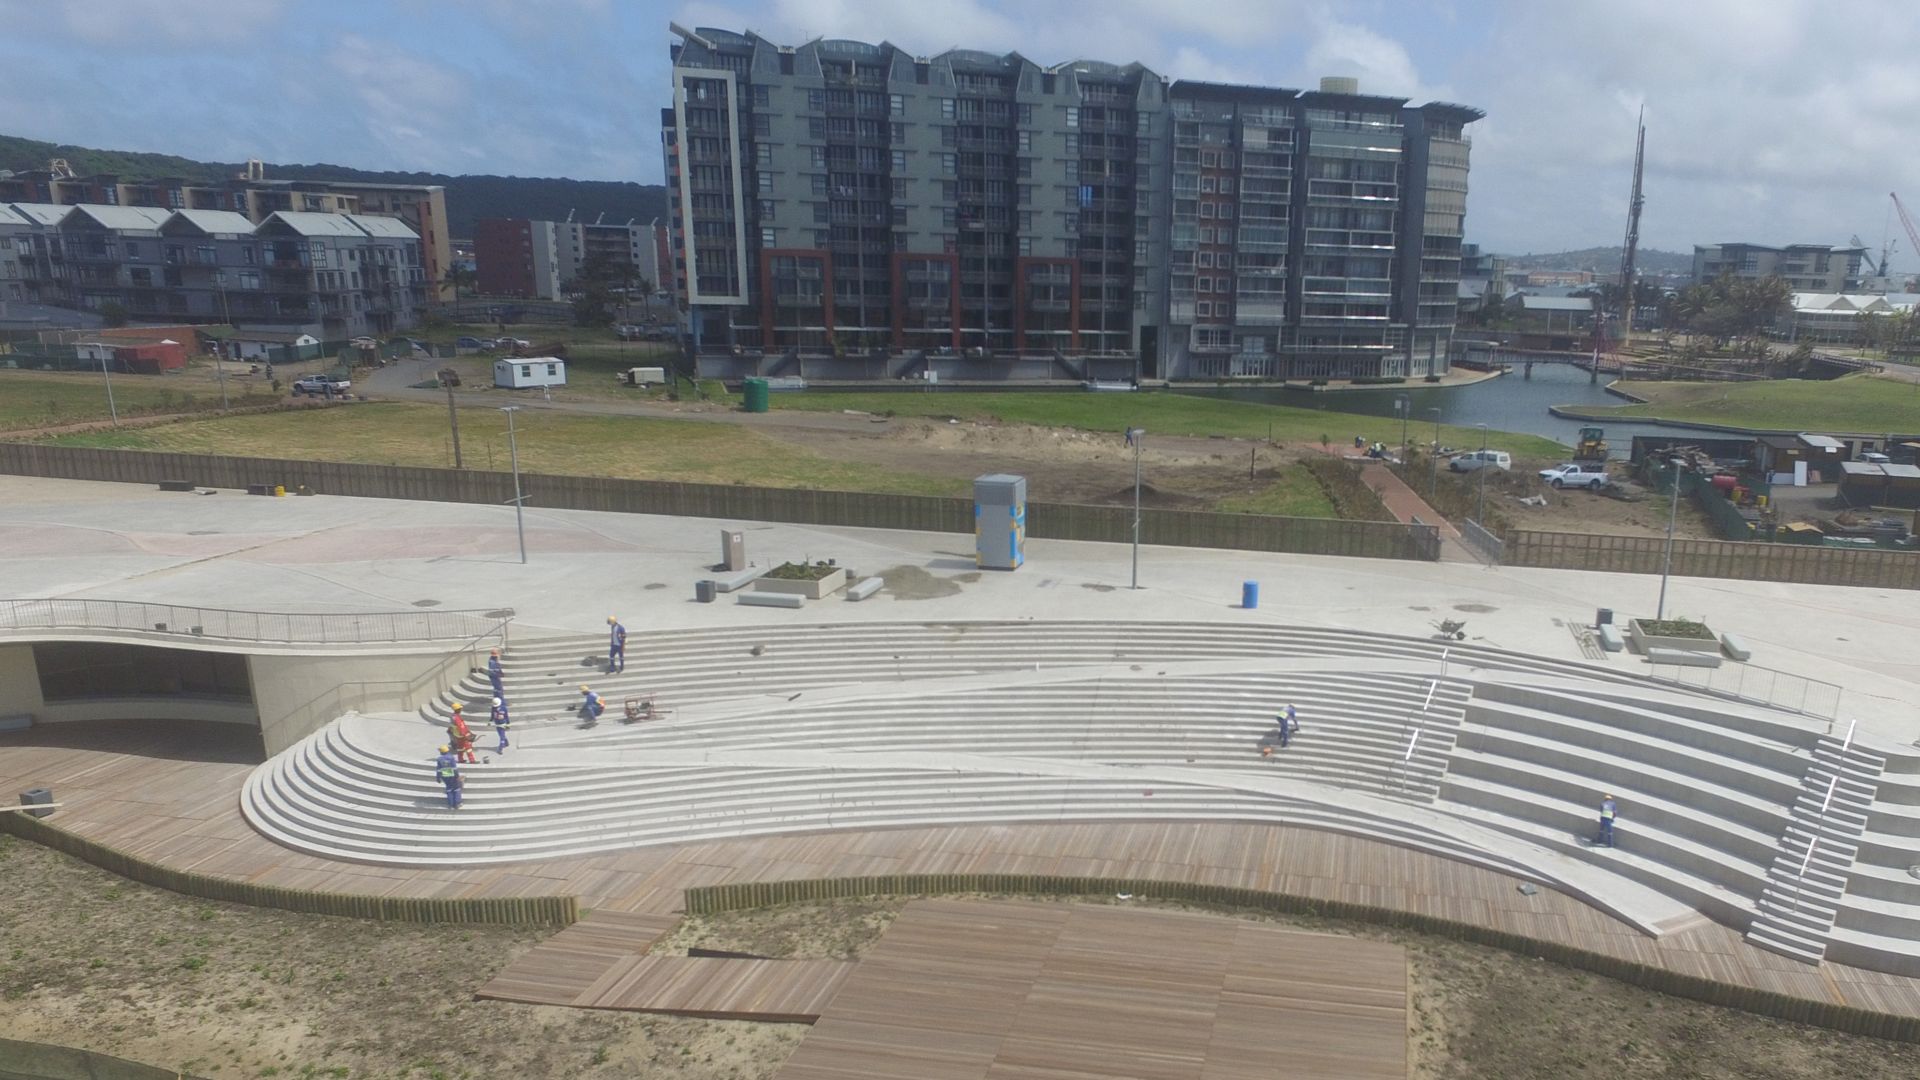 A wide range of Sika solutions were used for the renovations at the Durban Point Waterfront project